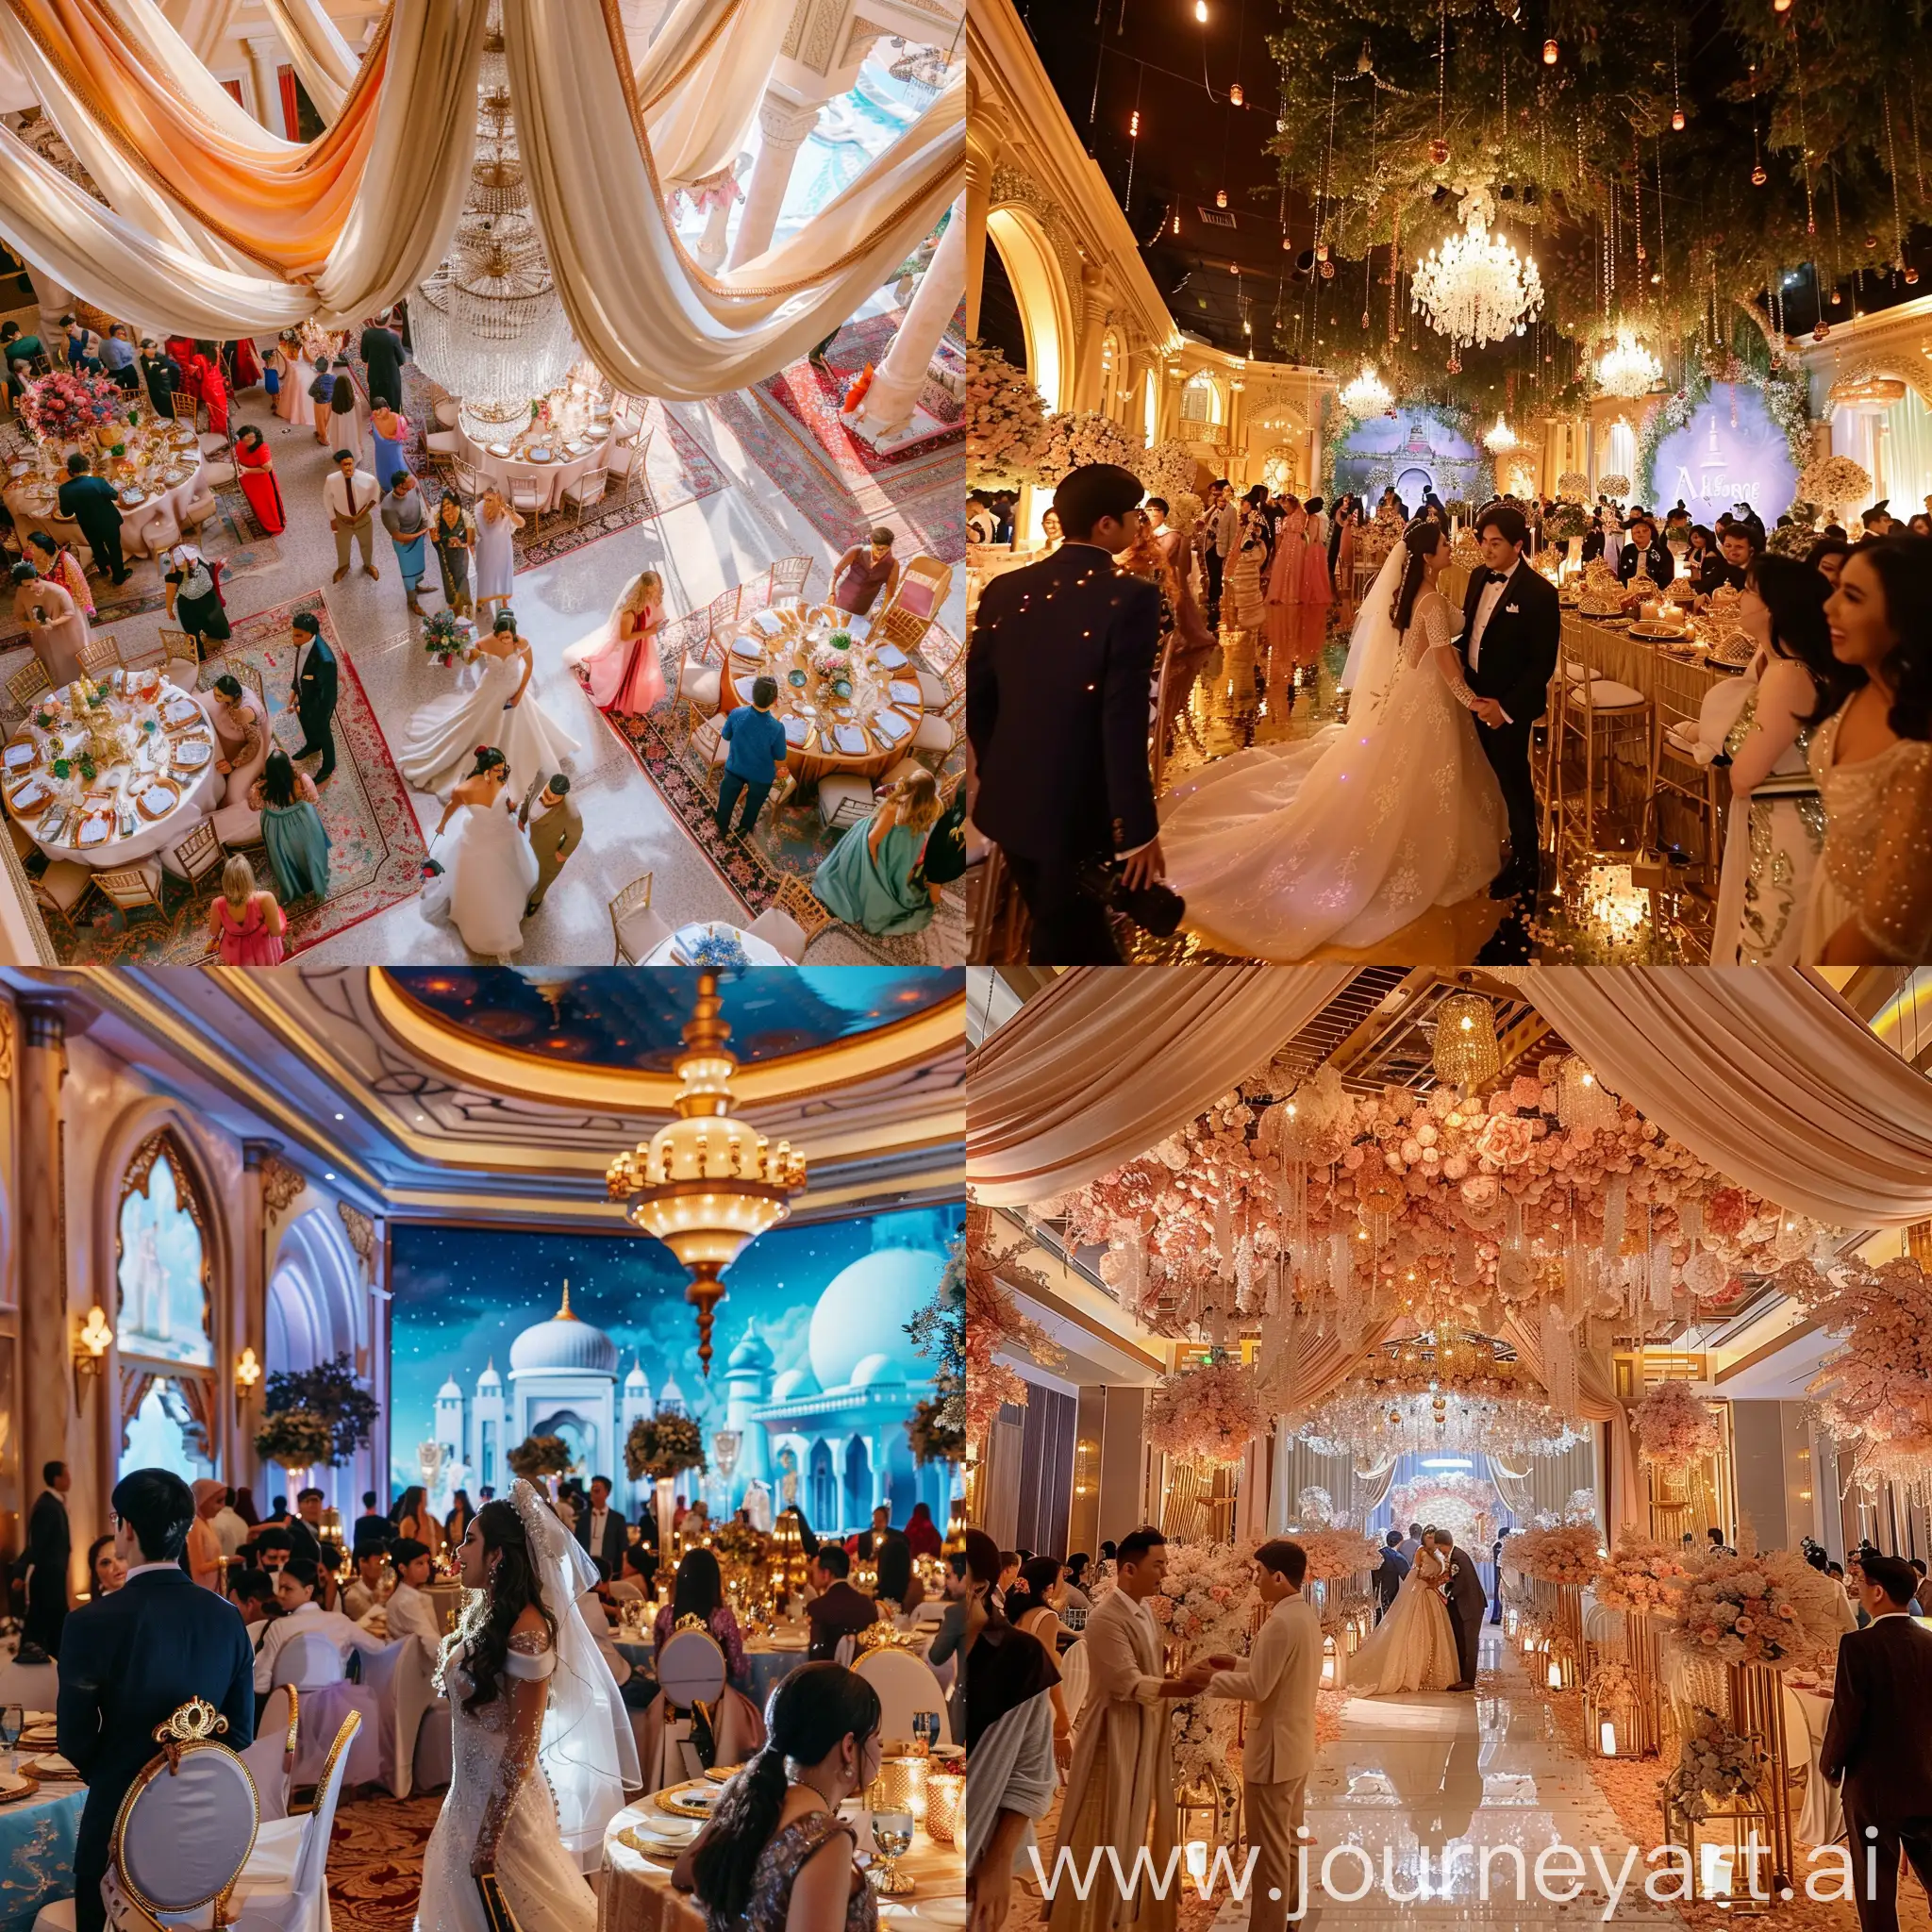 Enchanting-AladdinThemed-Wedding-Celebration-with-Bride-Groom-and-Guests